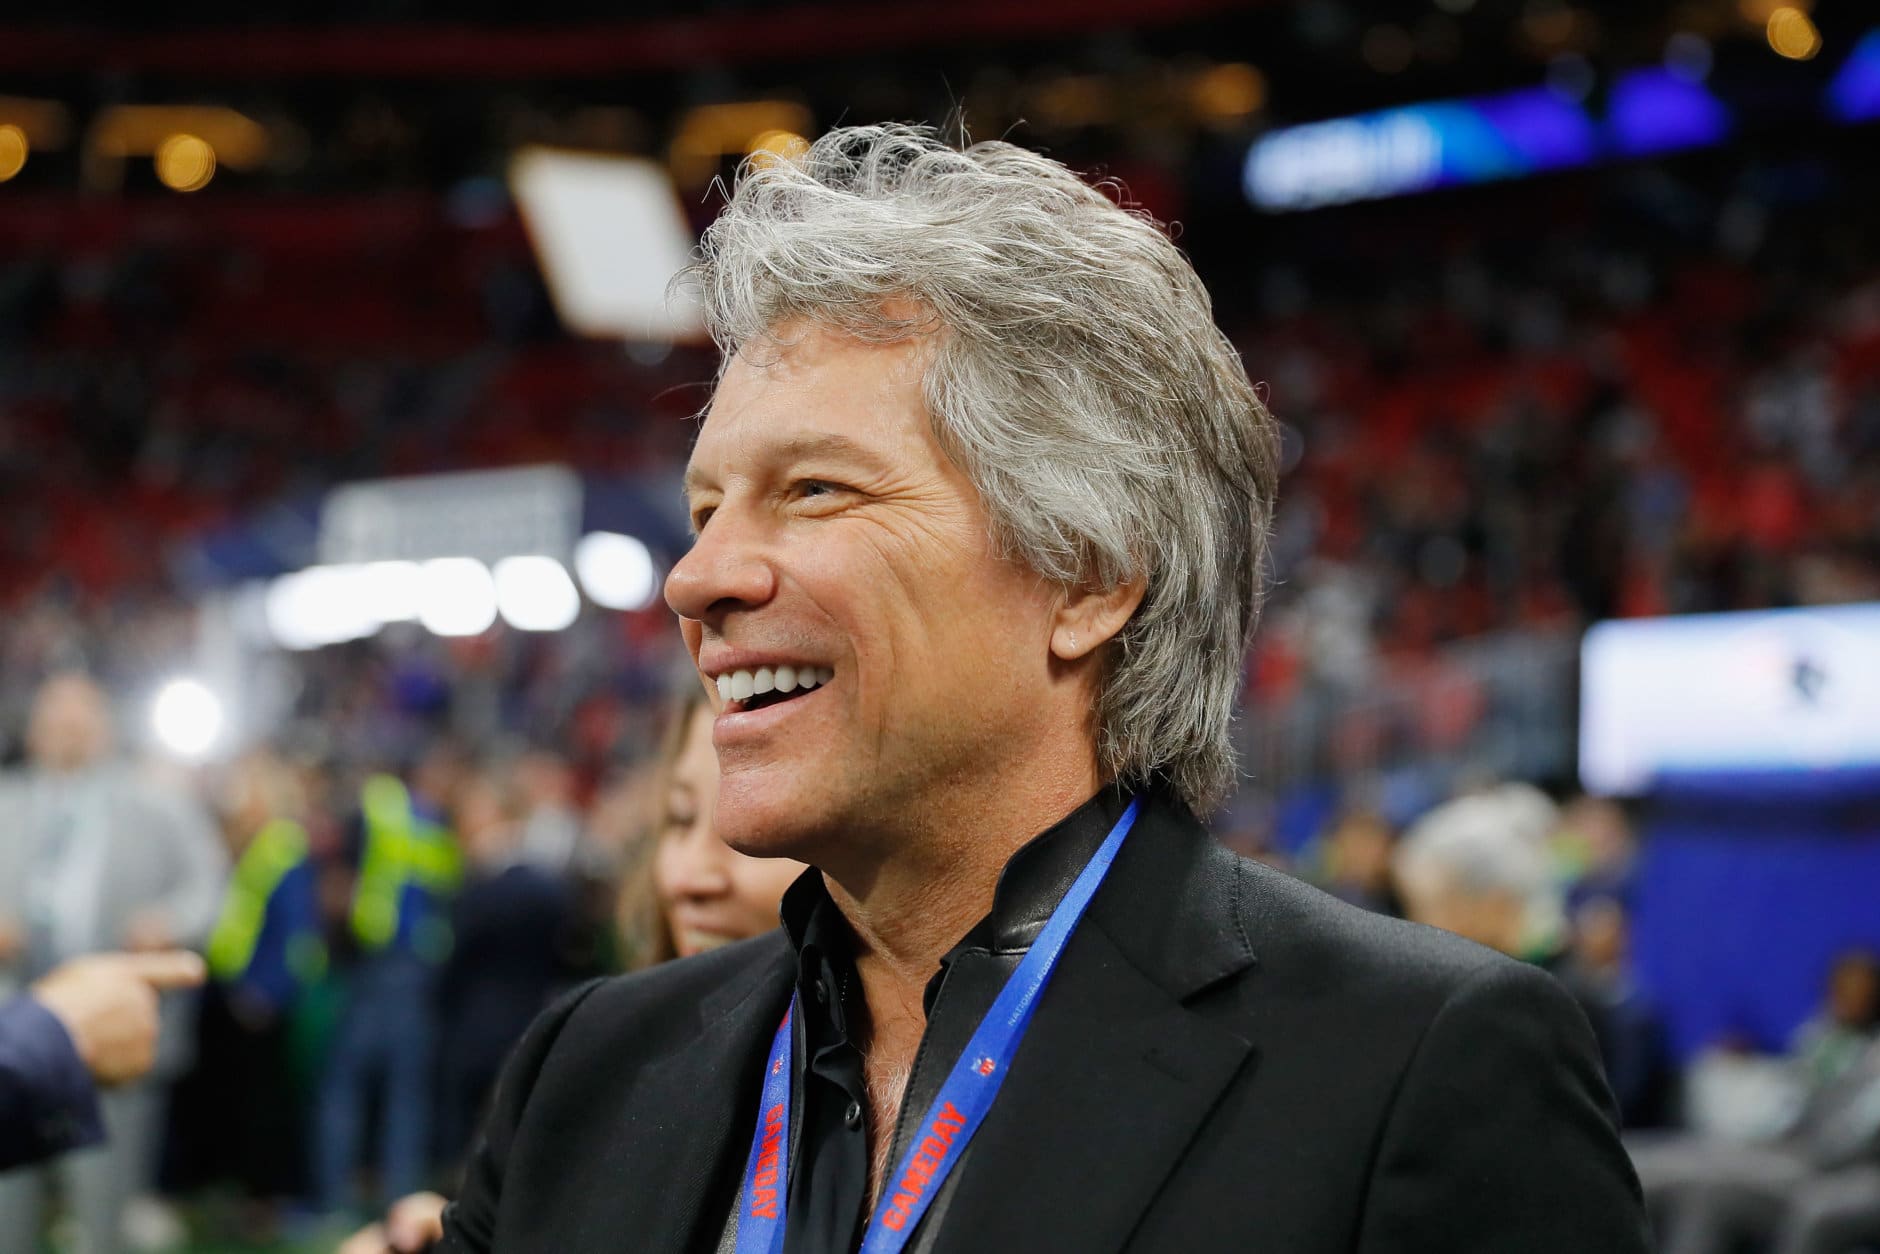 ATLANTA, GA - FEBRUARY 03: Jon Bon Jovi looks on during pregame at Super Bowl LIII between Los Angeles Rams and the New England Patriots at Mercedes-Benz Stadium on February 3, 2019 in Atlanta, Georgia.  (Photo by Kevin C. Cox/Getty Images)